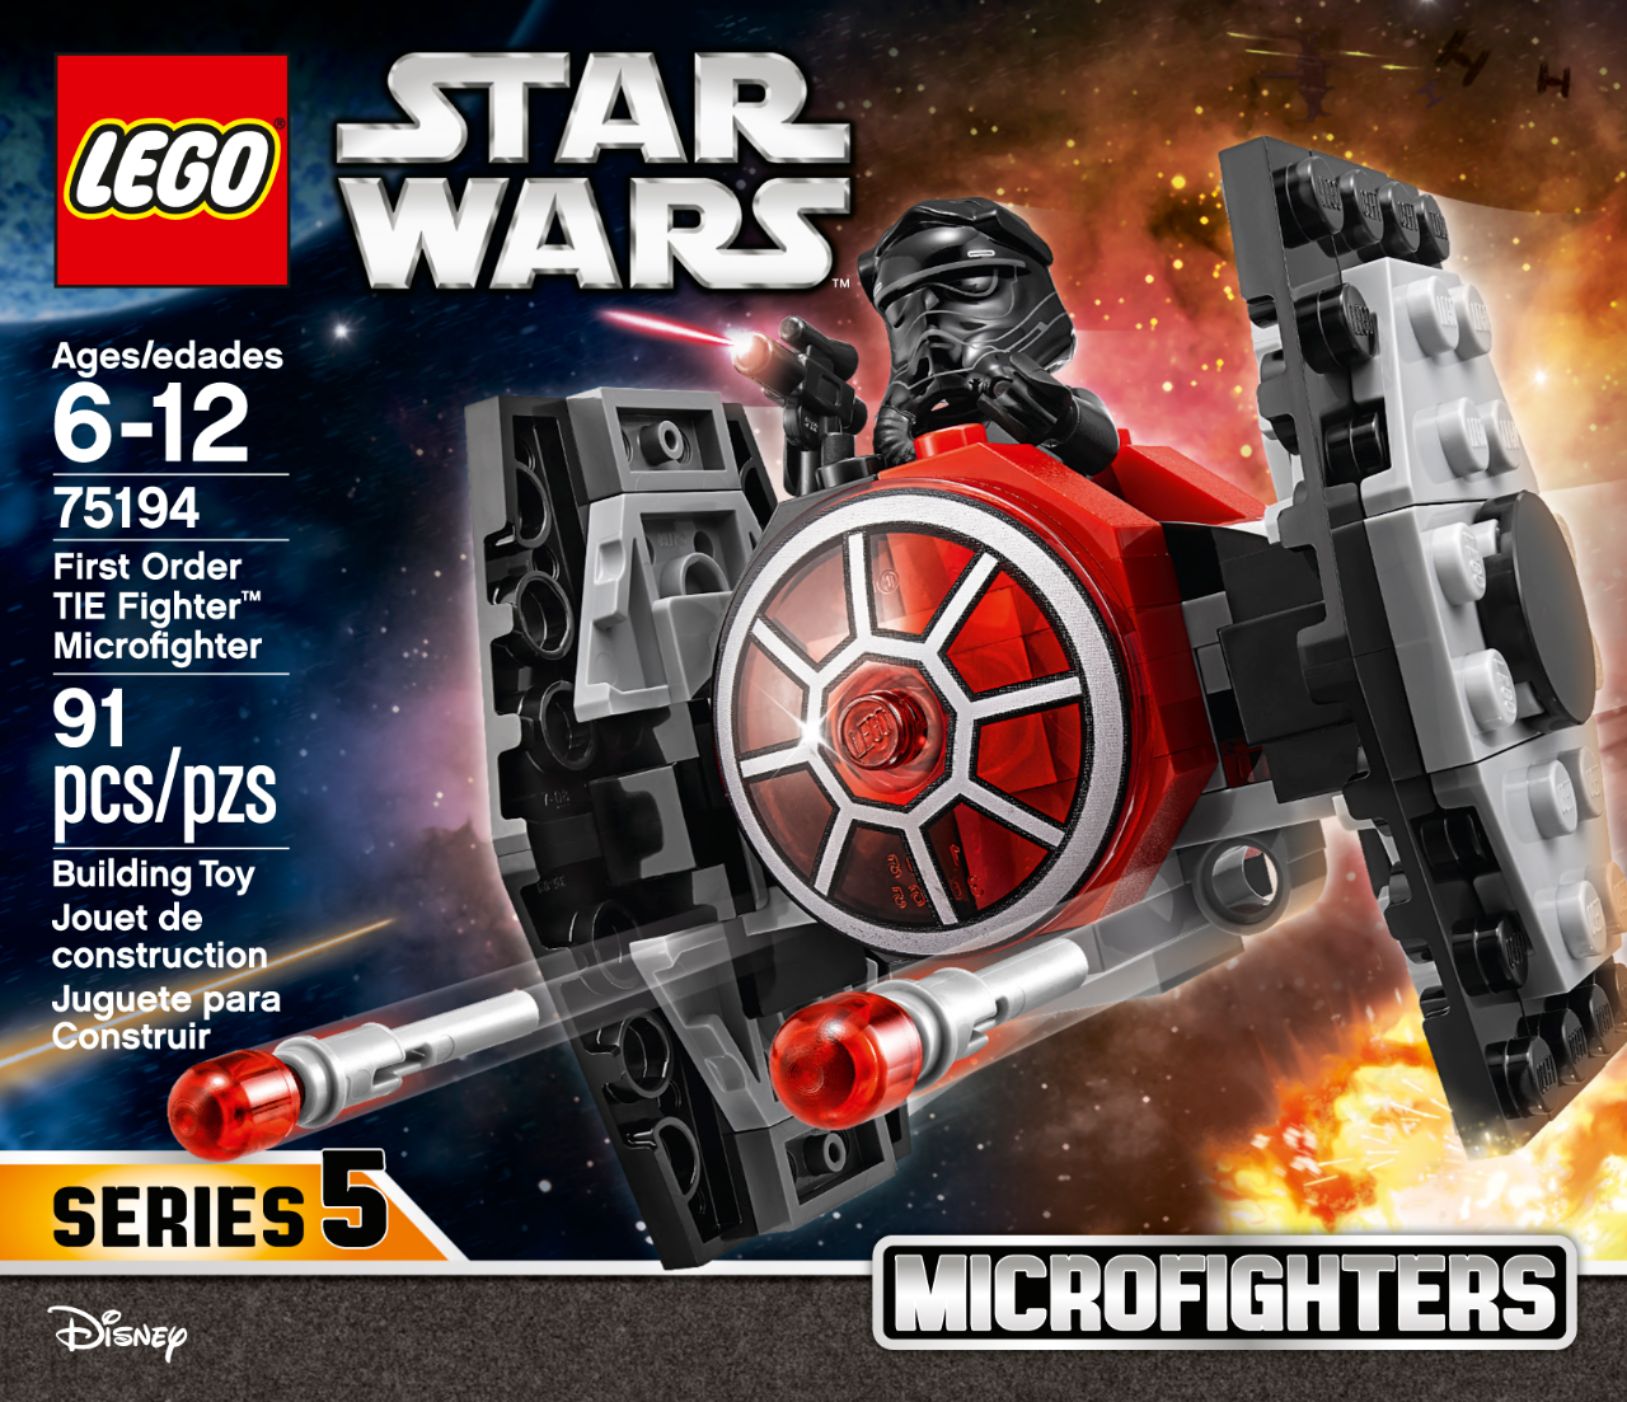 A8 Lego Star Wars First Order TIE Fighter Microfighter 91 pieces 75194 